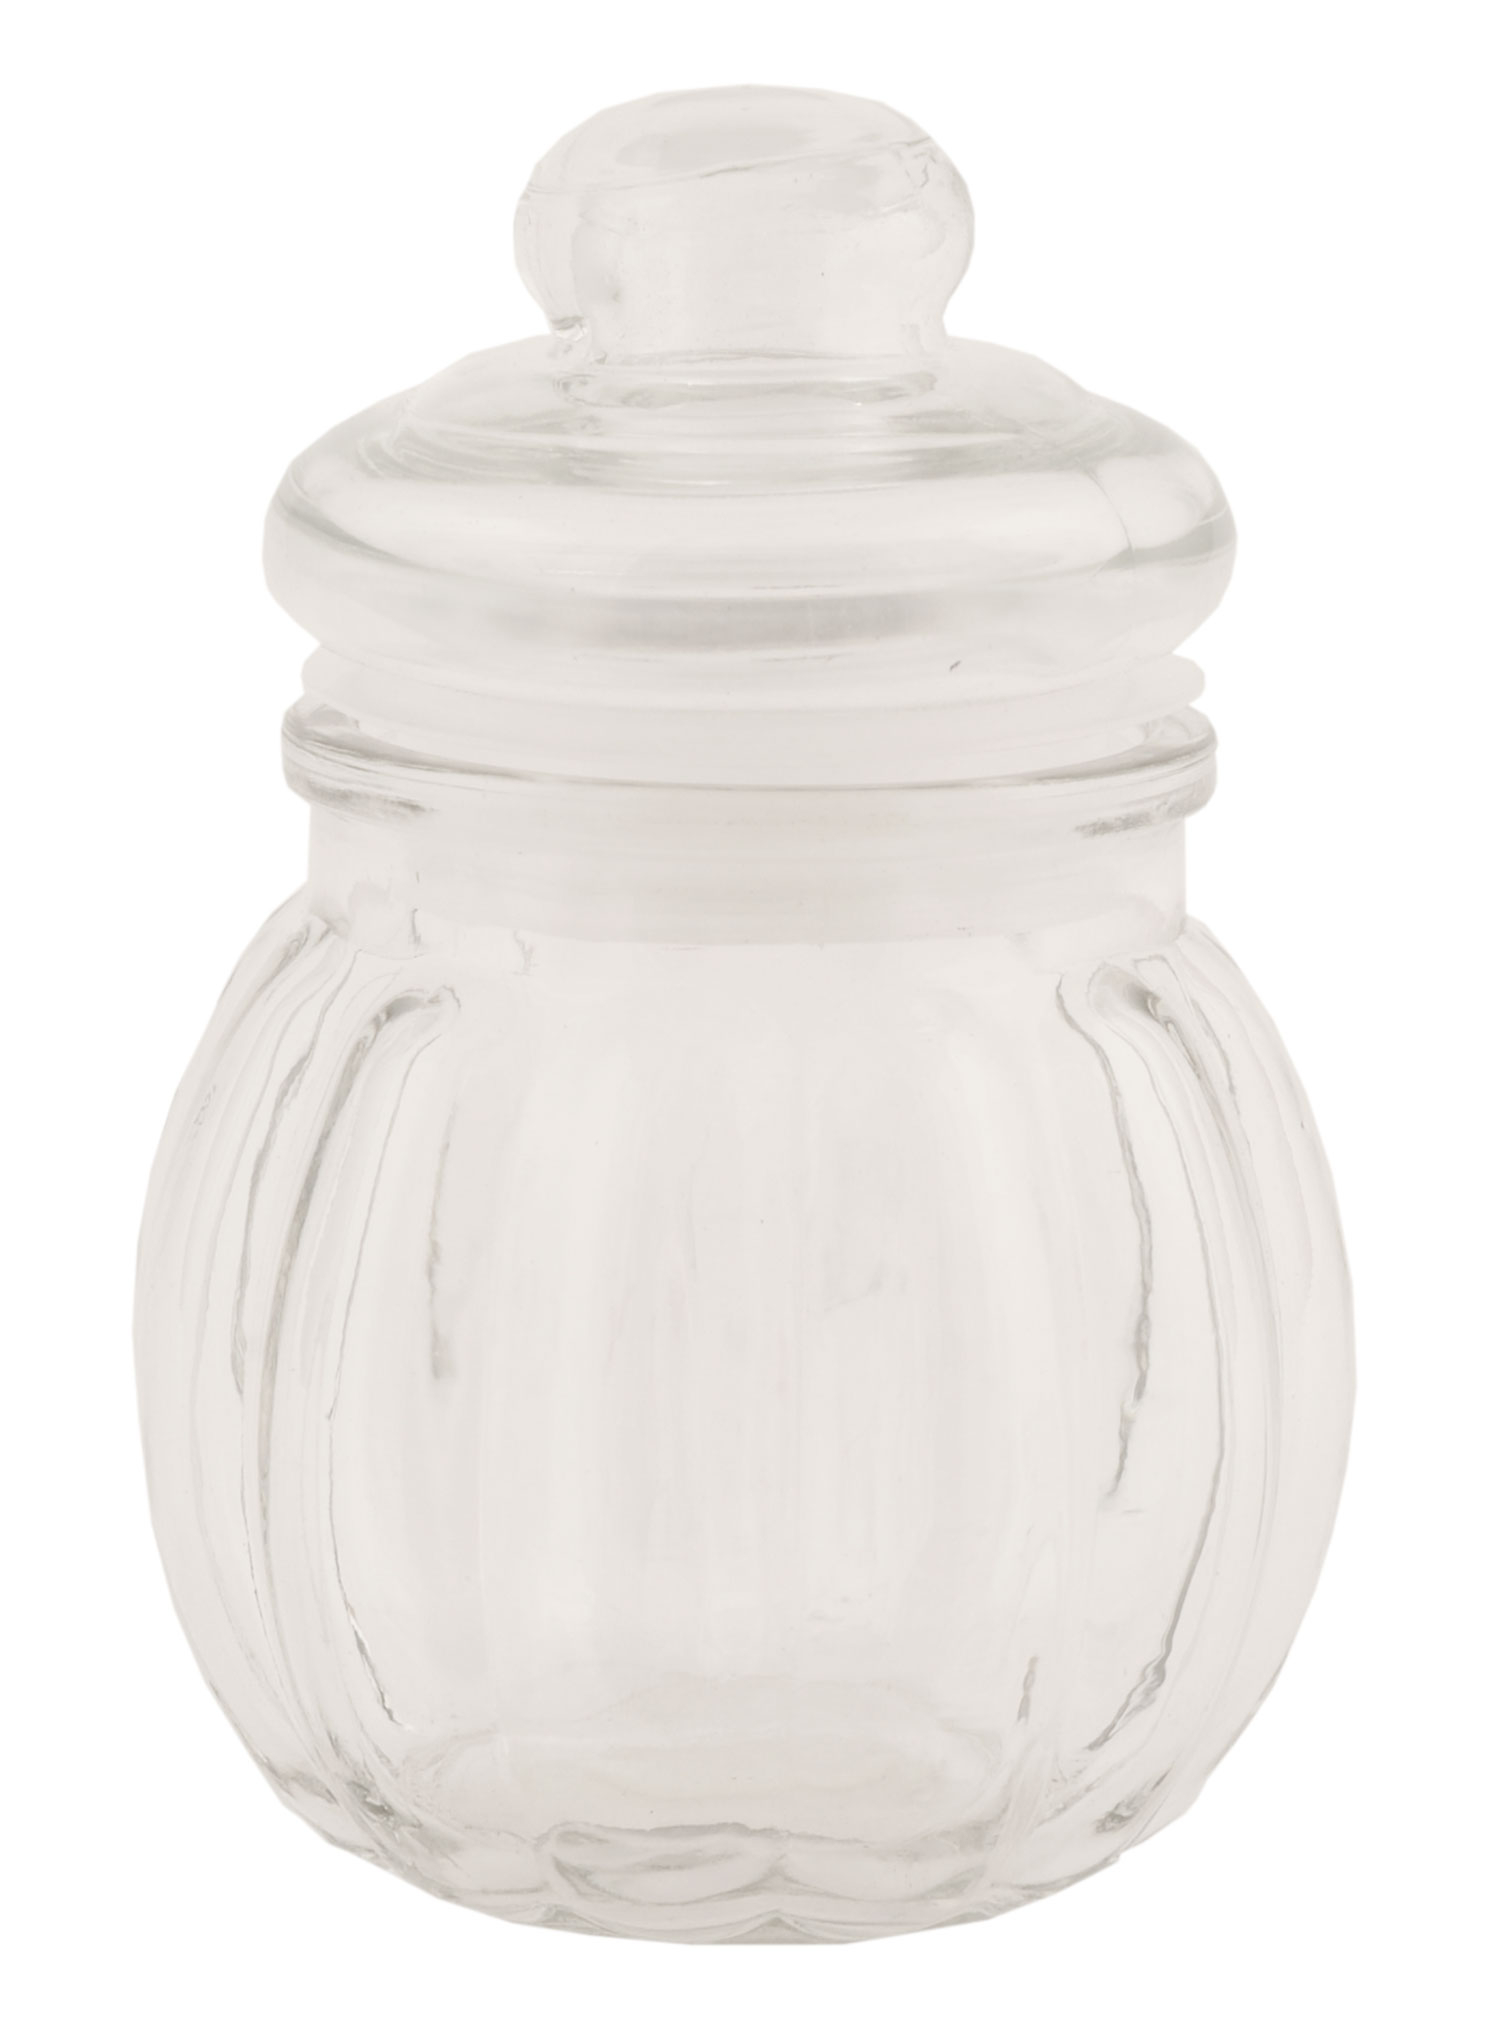 Glass jar, spice container